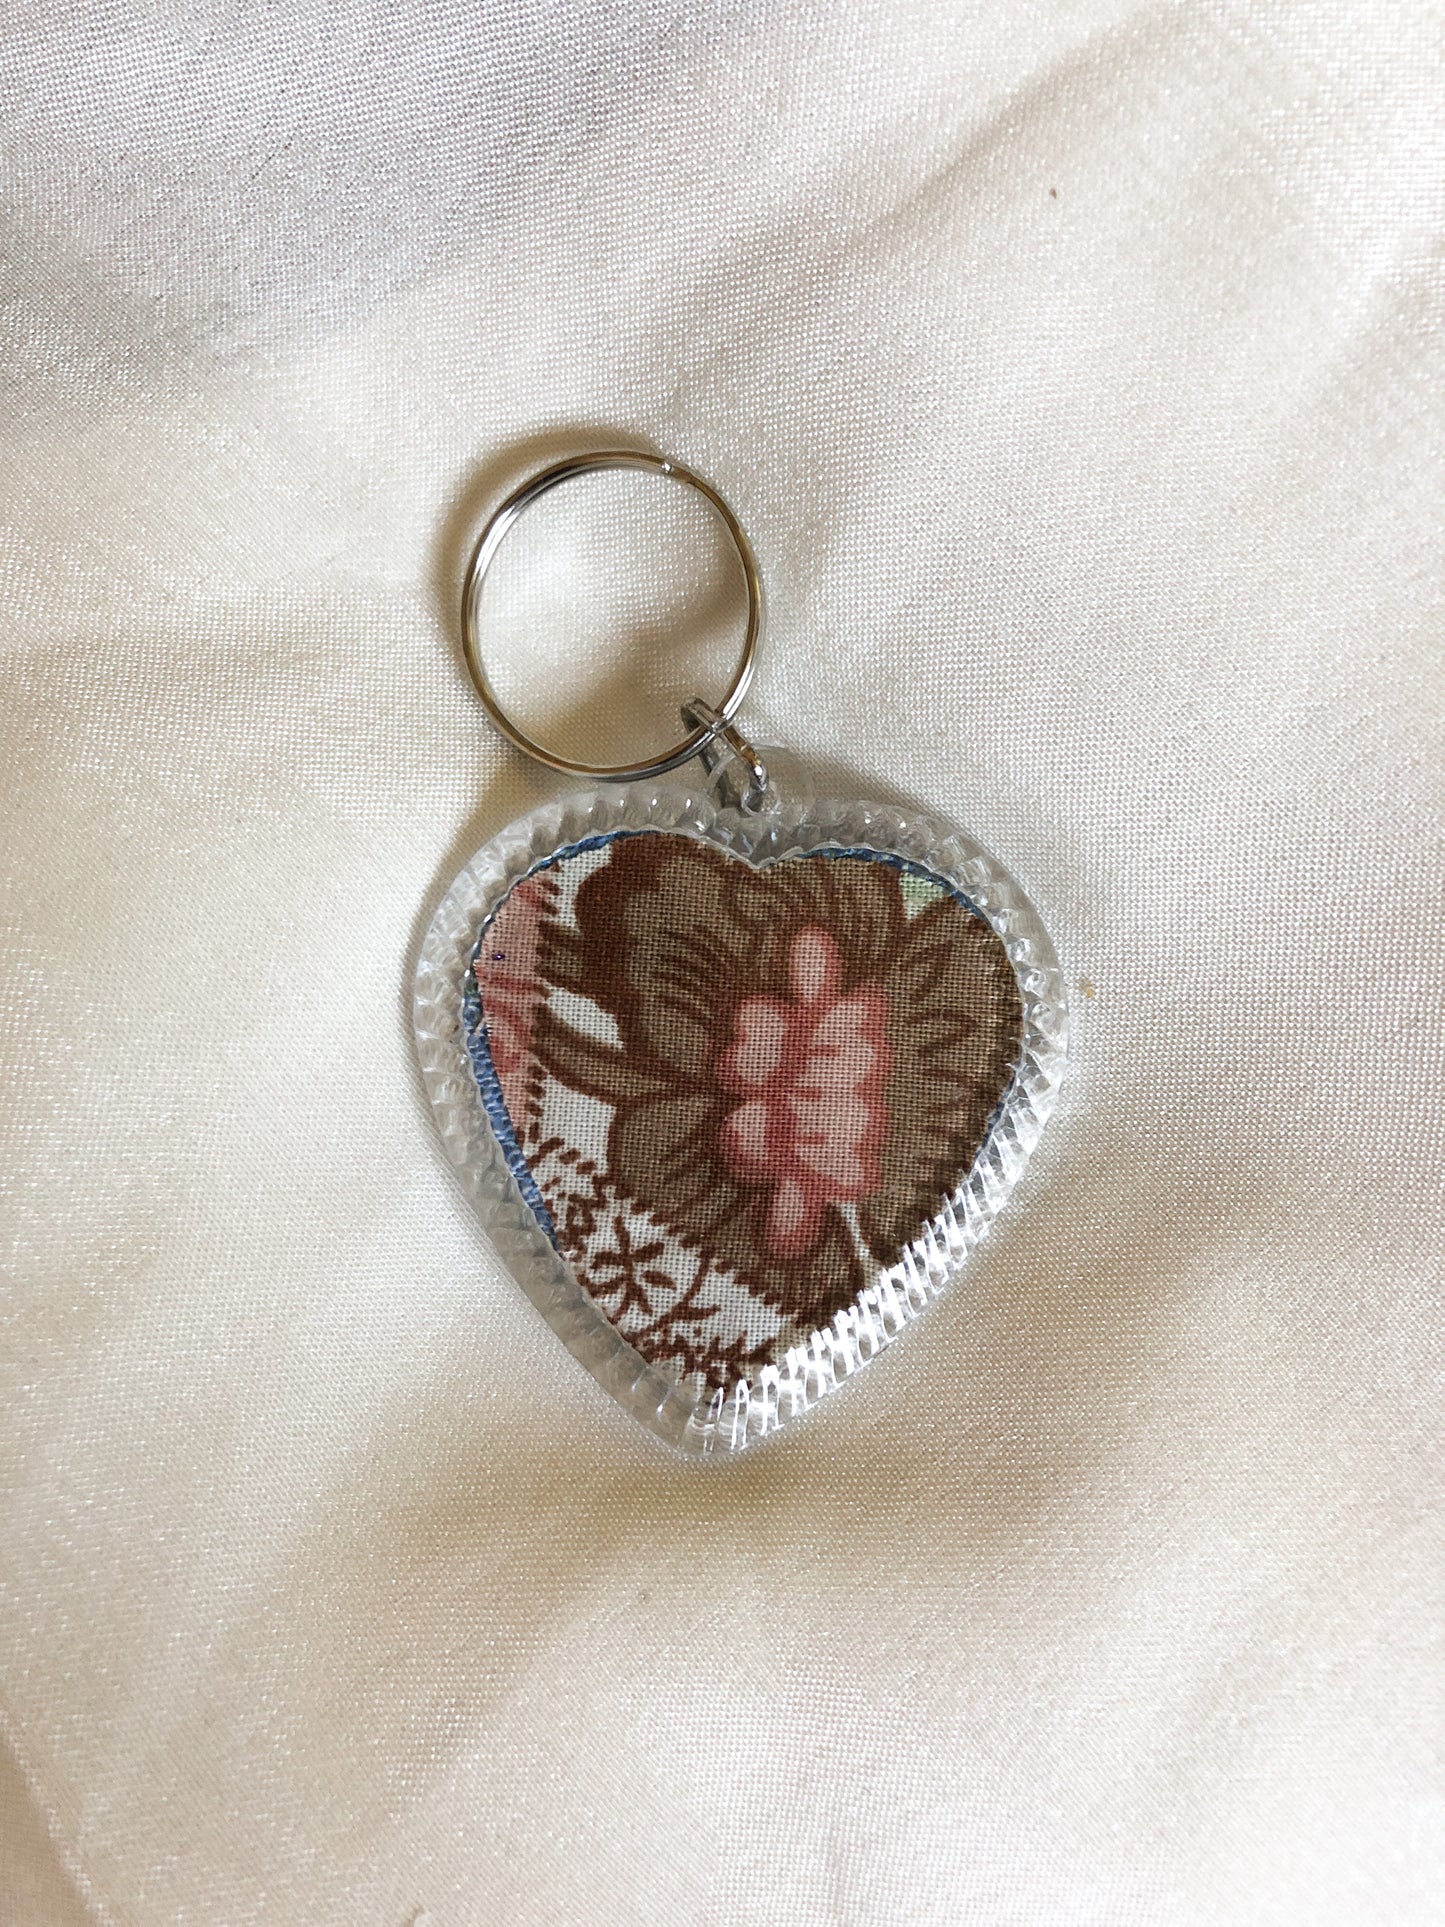 Heart Shaped Keyring - Brown and Denim Floral - Upcycled - Duo Design